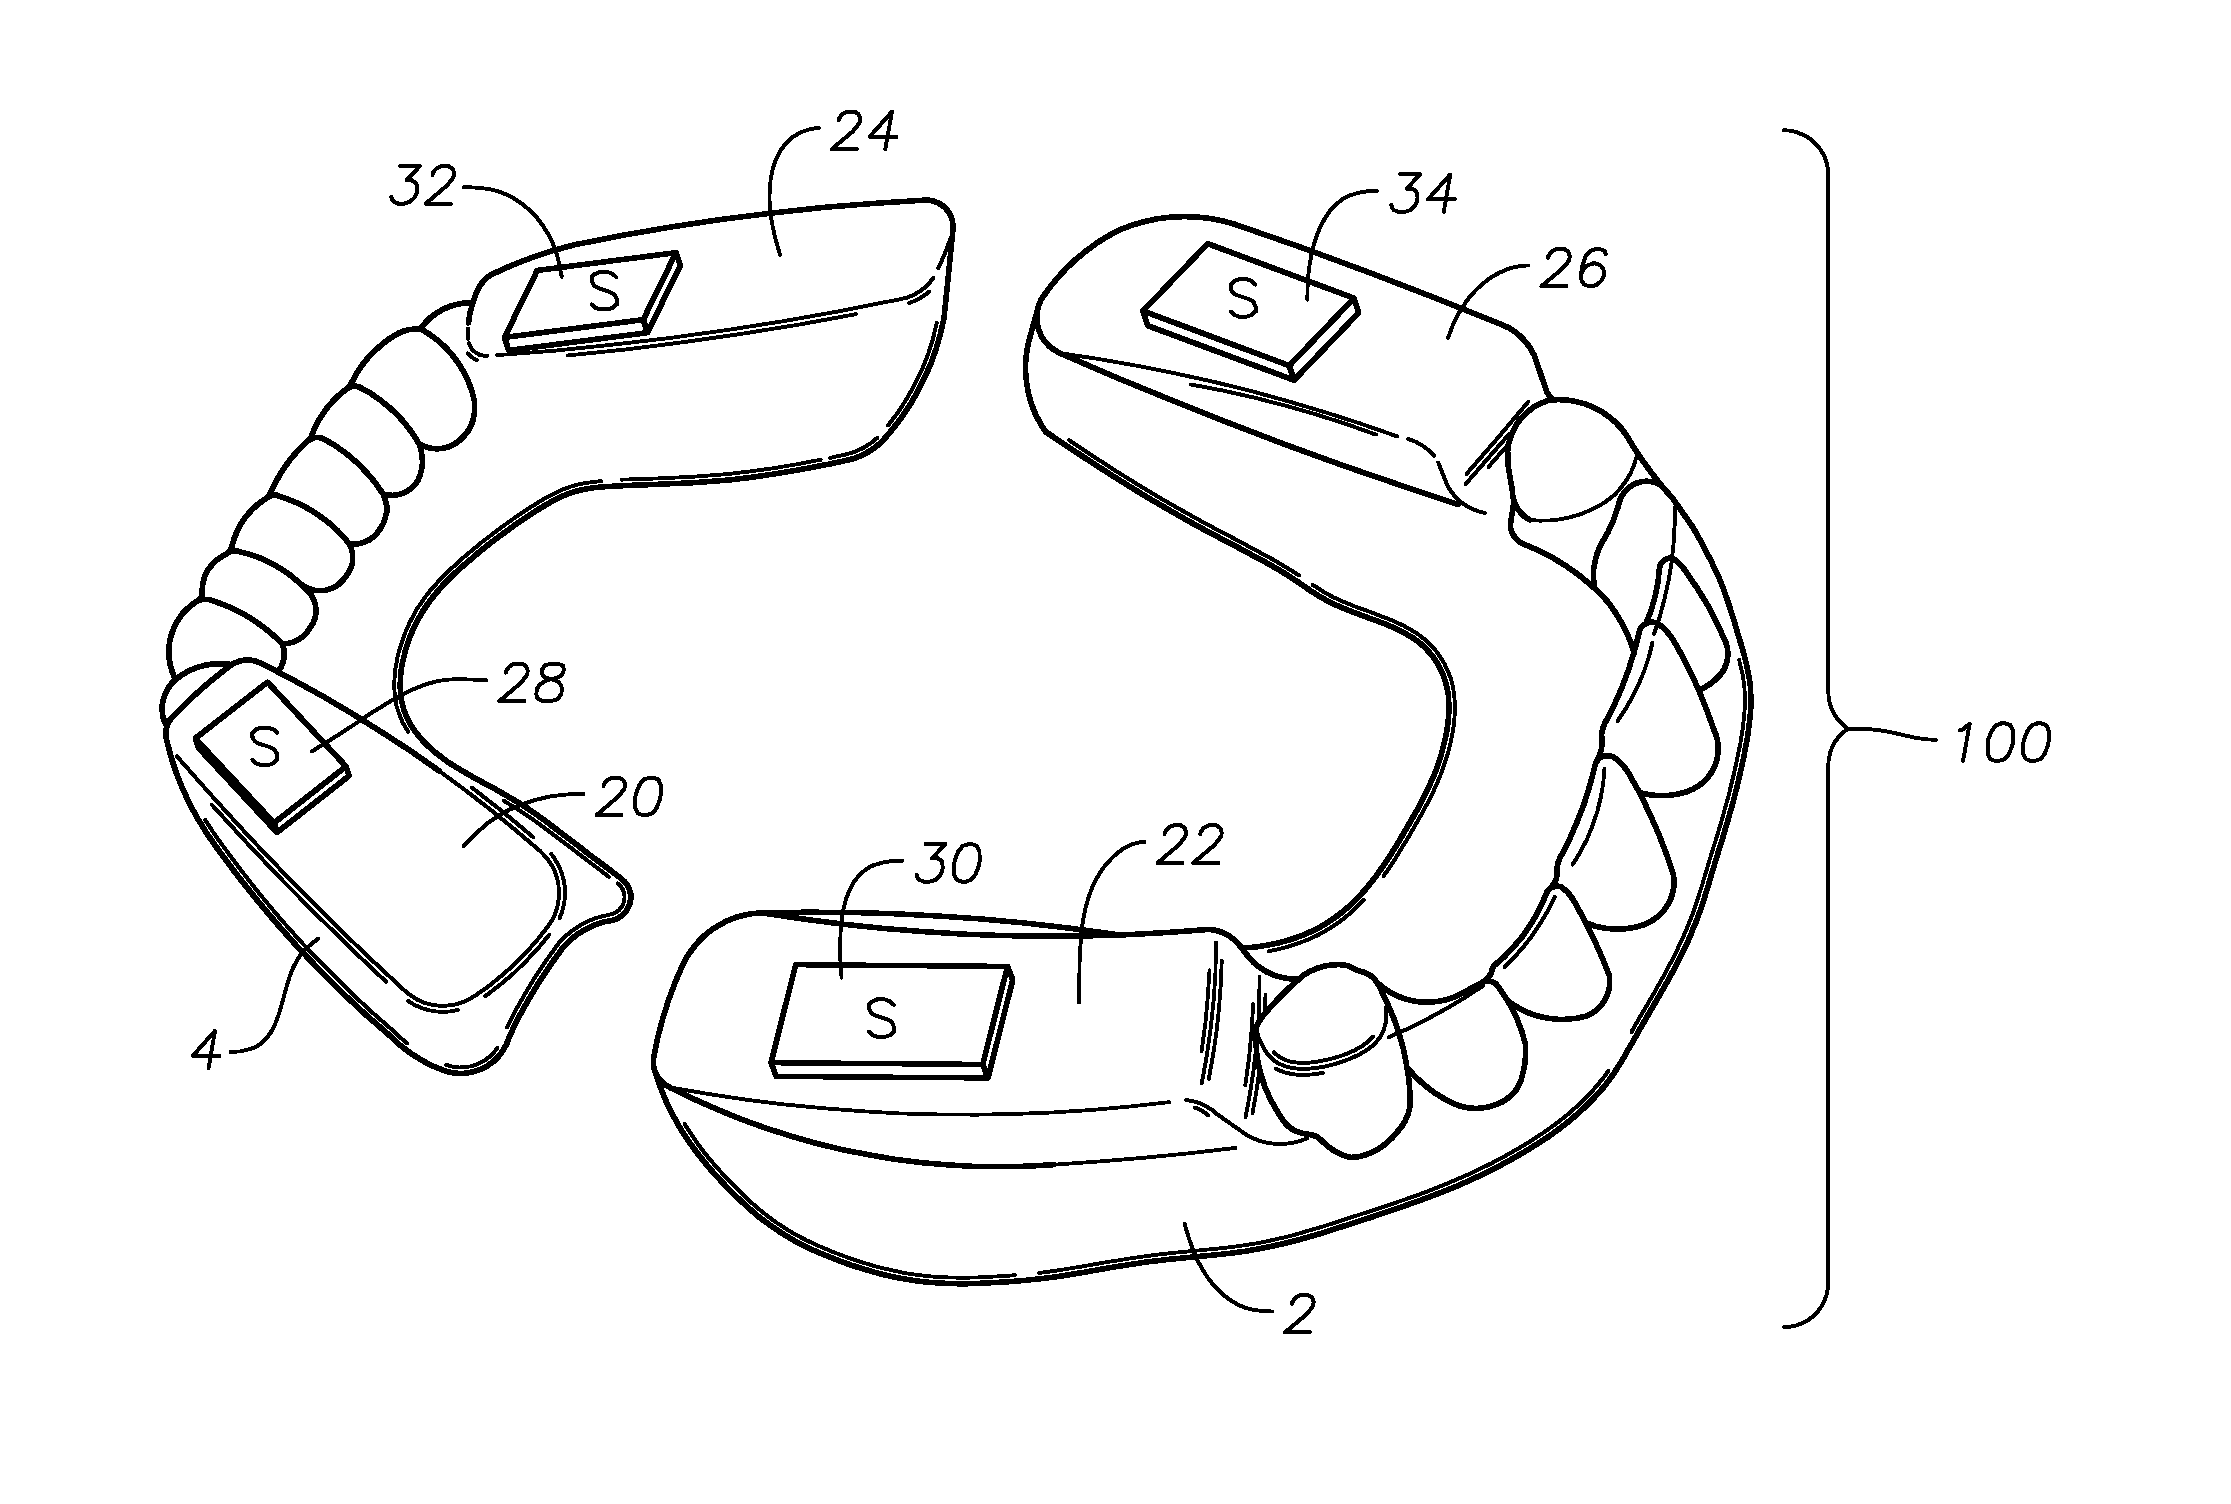 Oral devices, kits, and methods for reducing sleep apnea, snoring, and/or nasal drainage